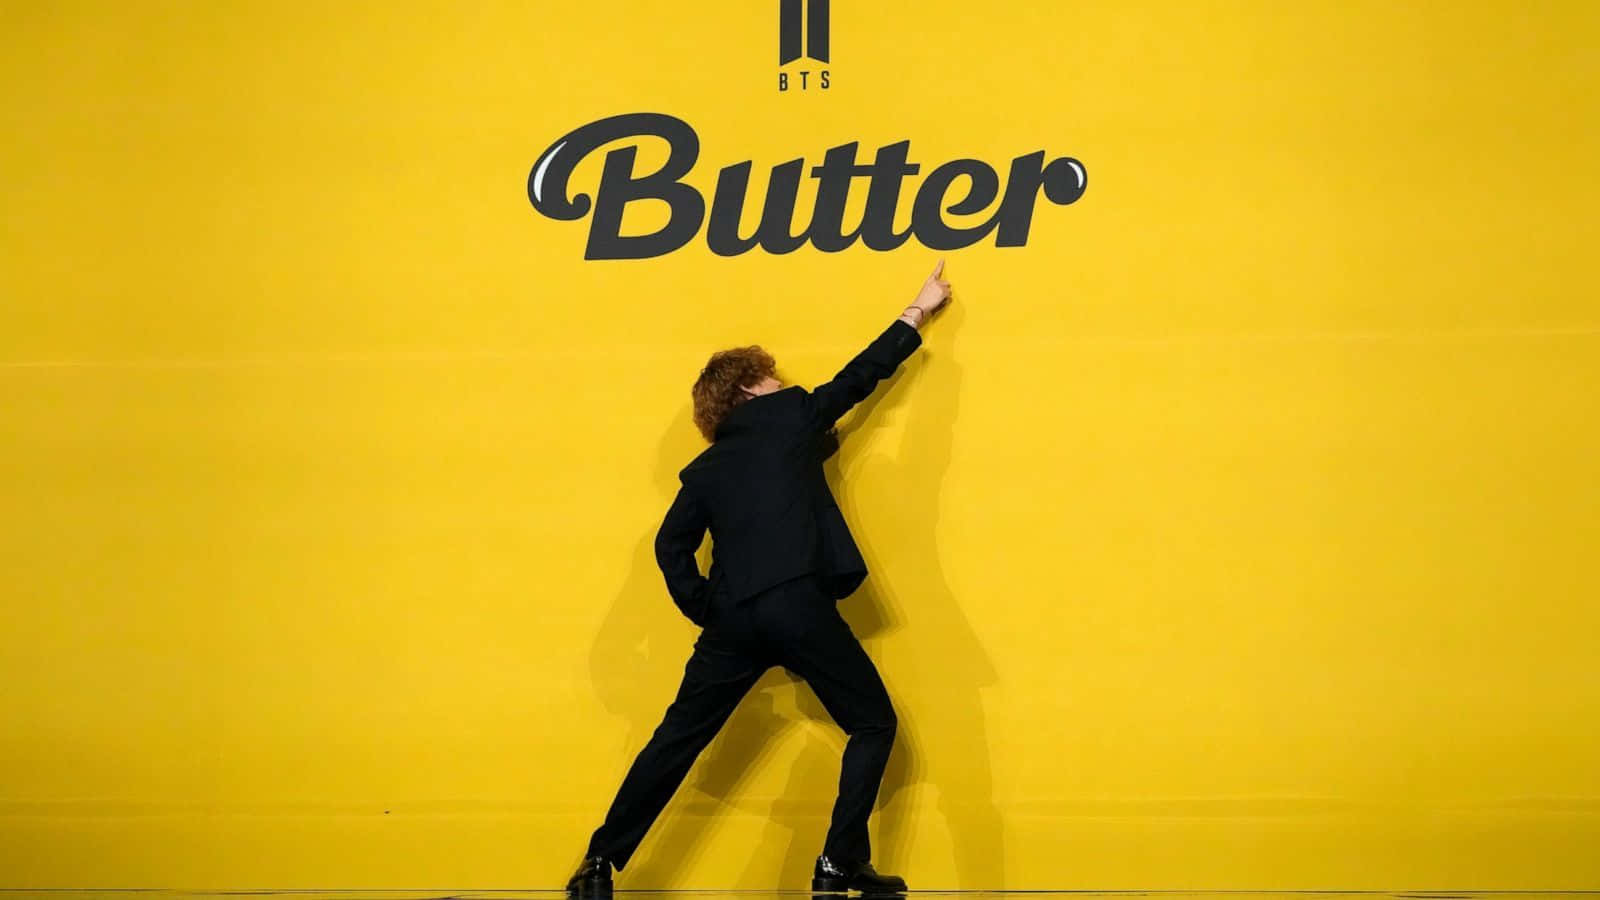 "Spread Sweetness Everywhere with BTS Butter!"